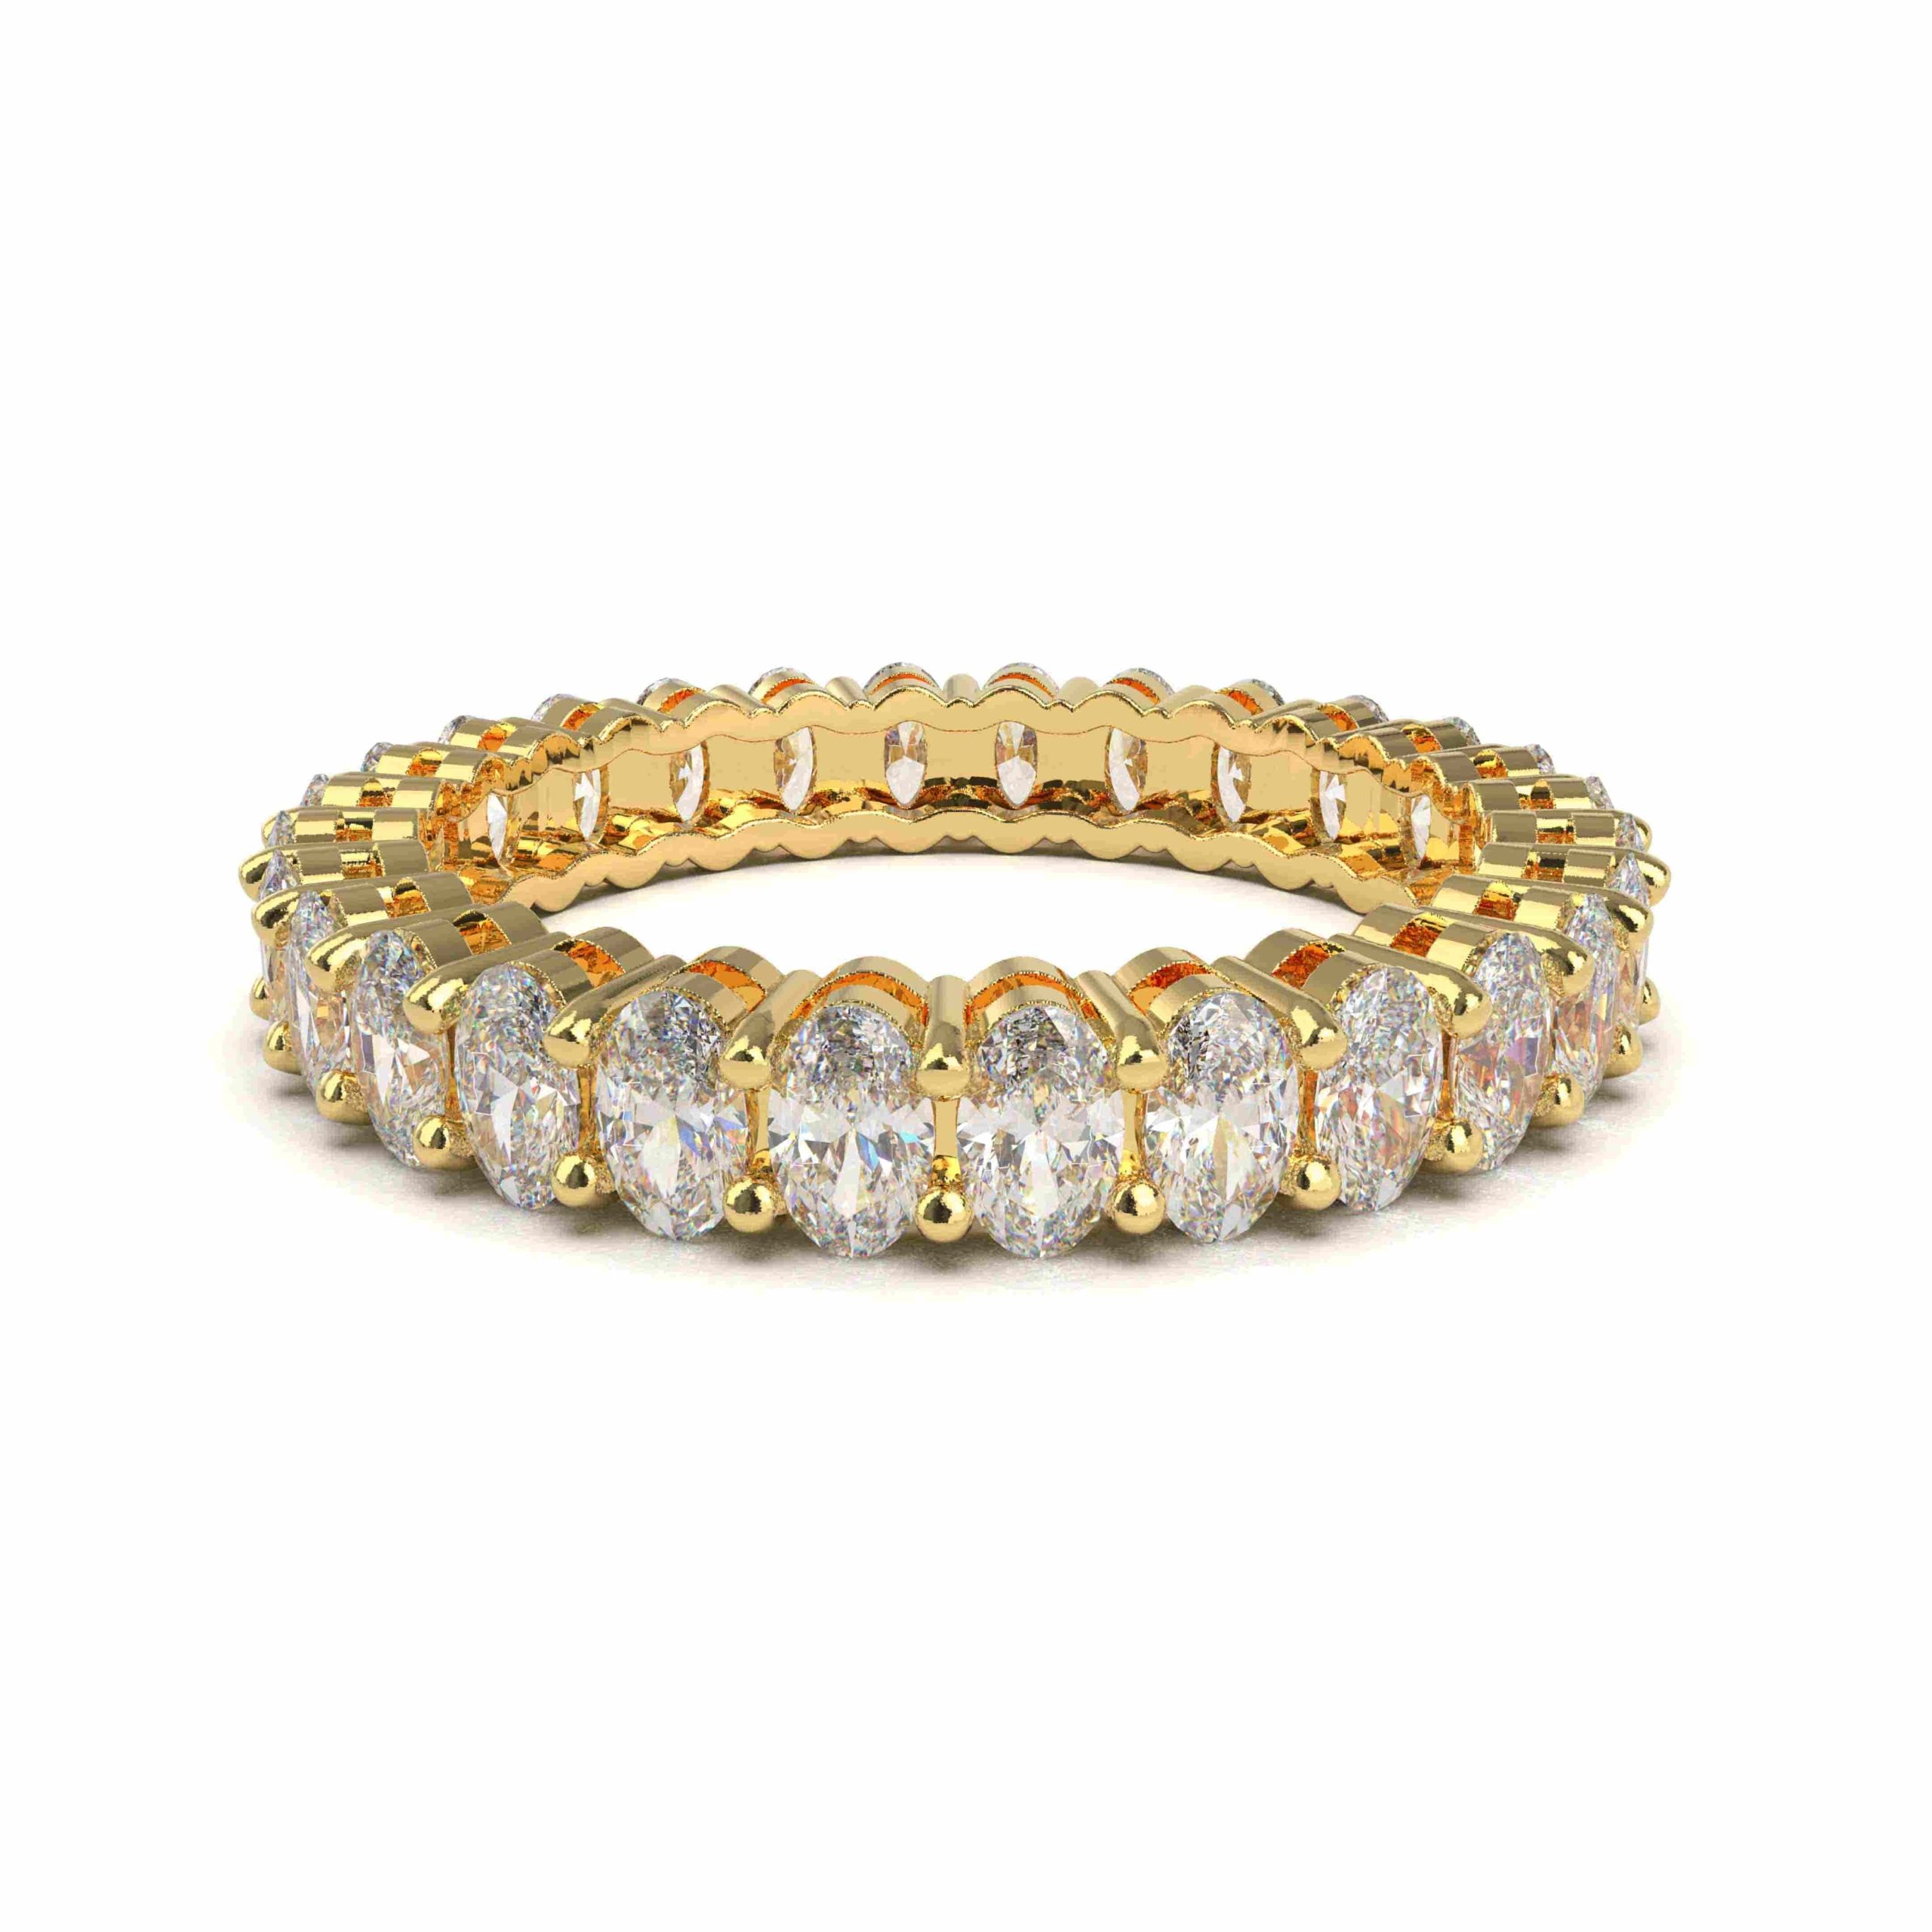 Oval Cut Eternity Ring by Cultive - Yellow Gold